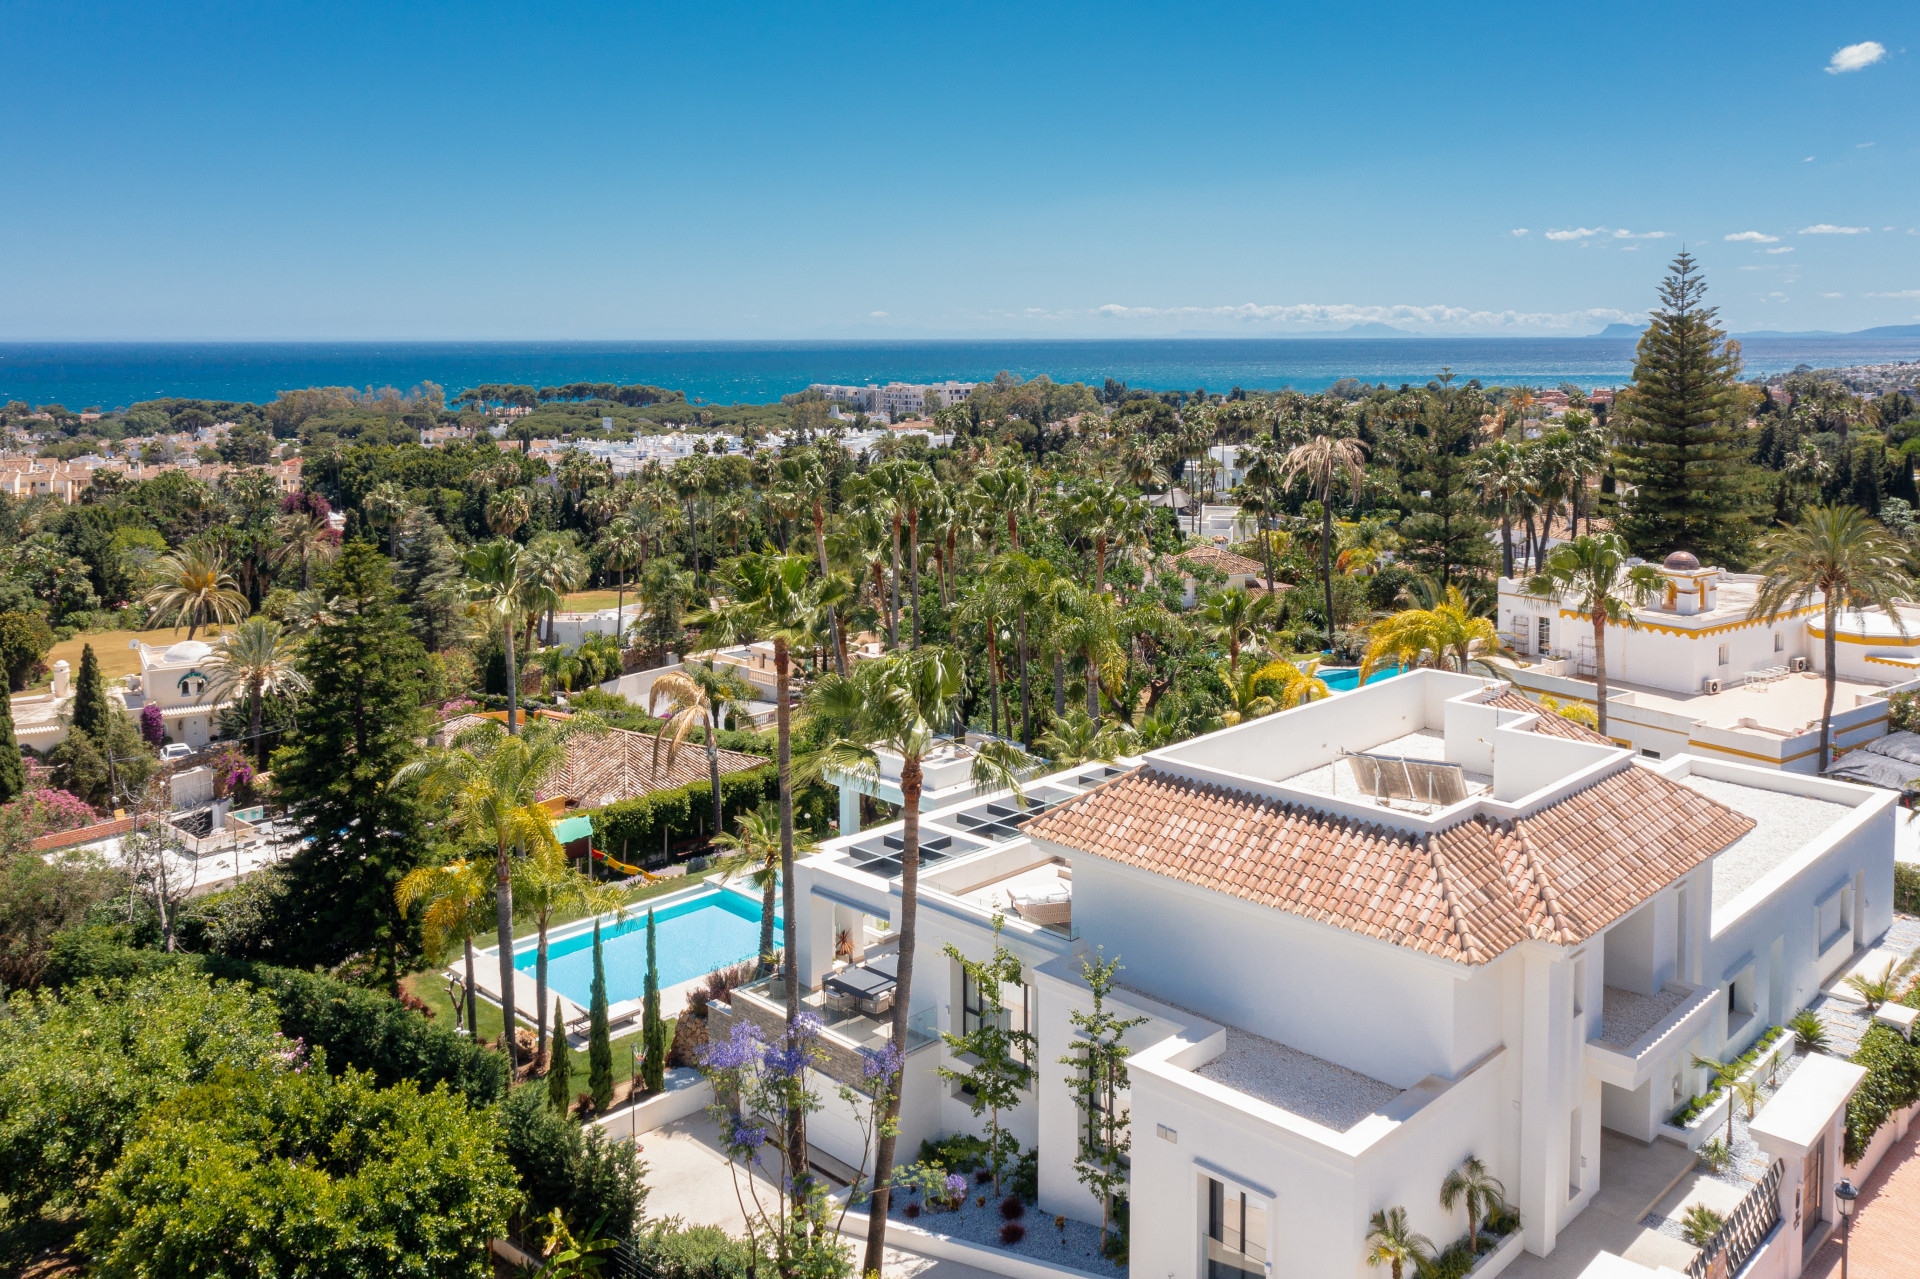 VILLA WITH PANORAMIC SEA VIEWS! Magnificent brand new villa with the most impressive sea views in the exclusive area of El Paraiso near commercial premises. Ready to move in, is the best villa in the area at this price segment